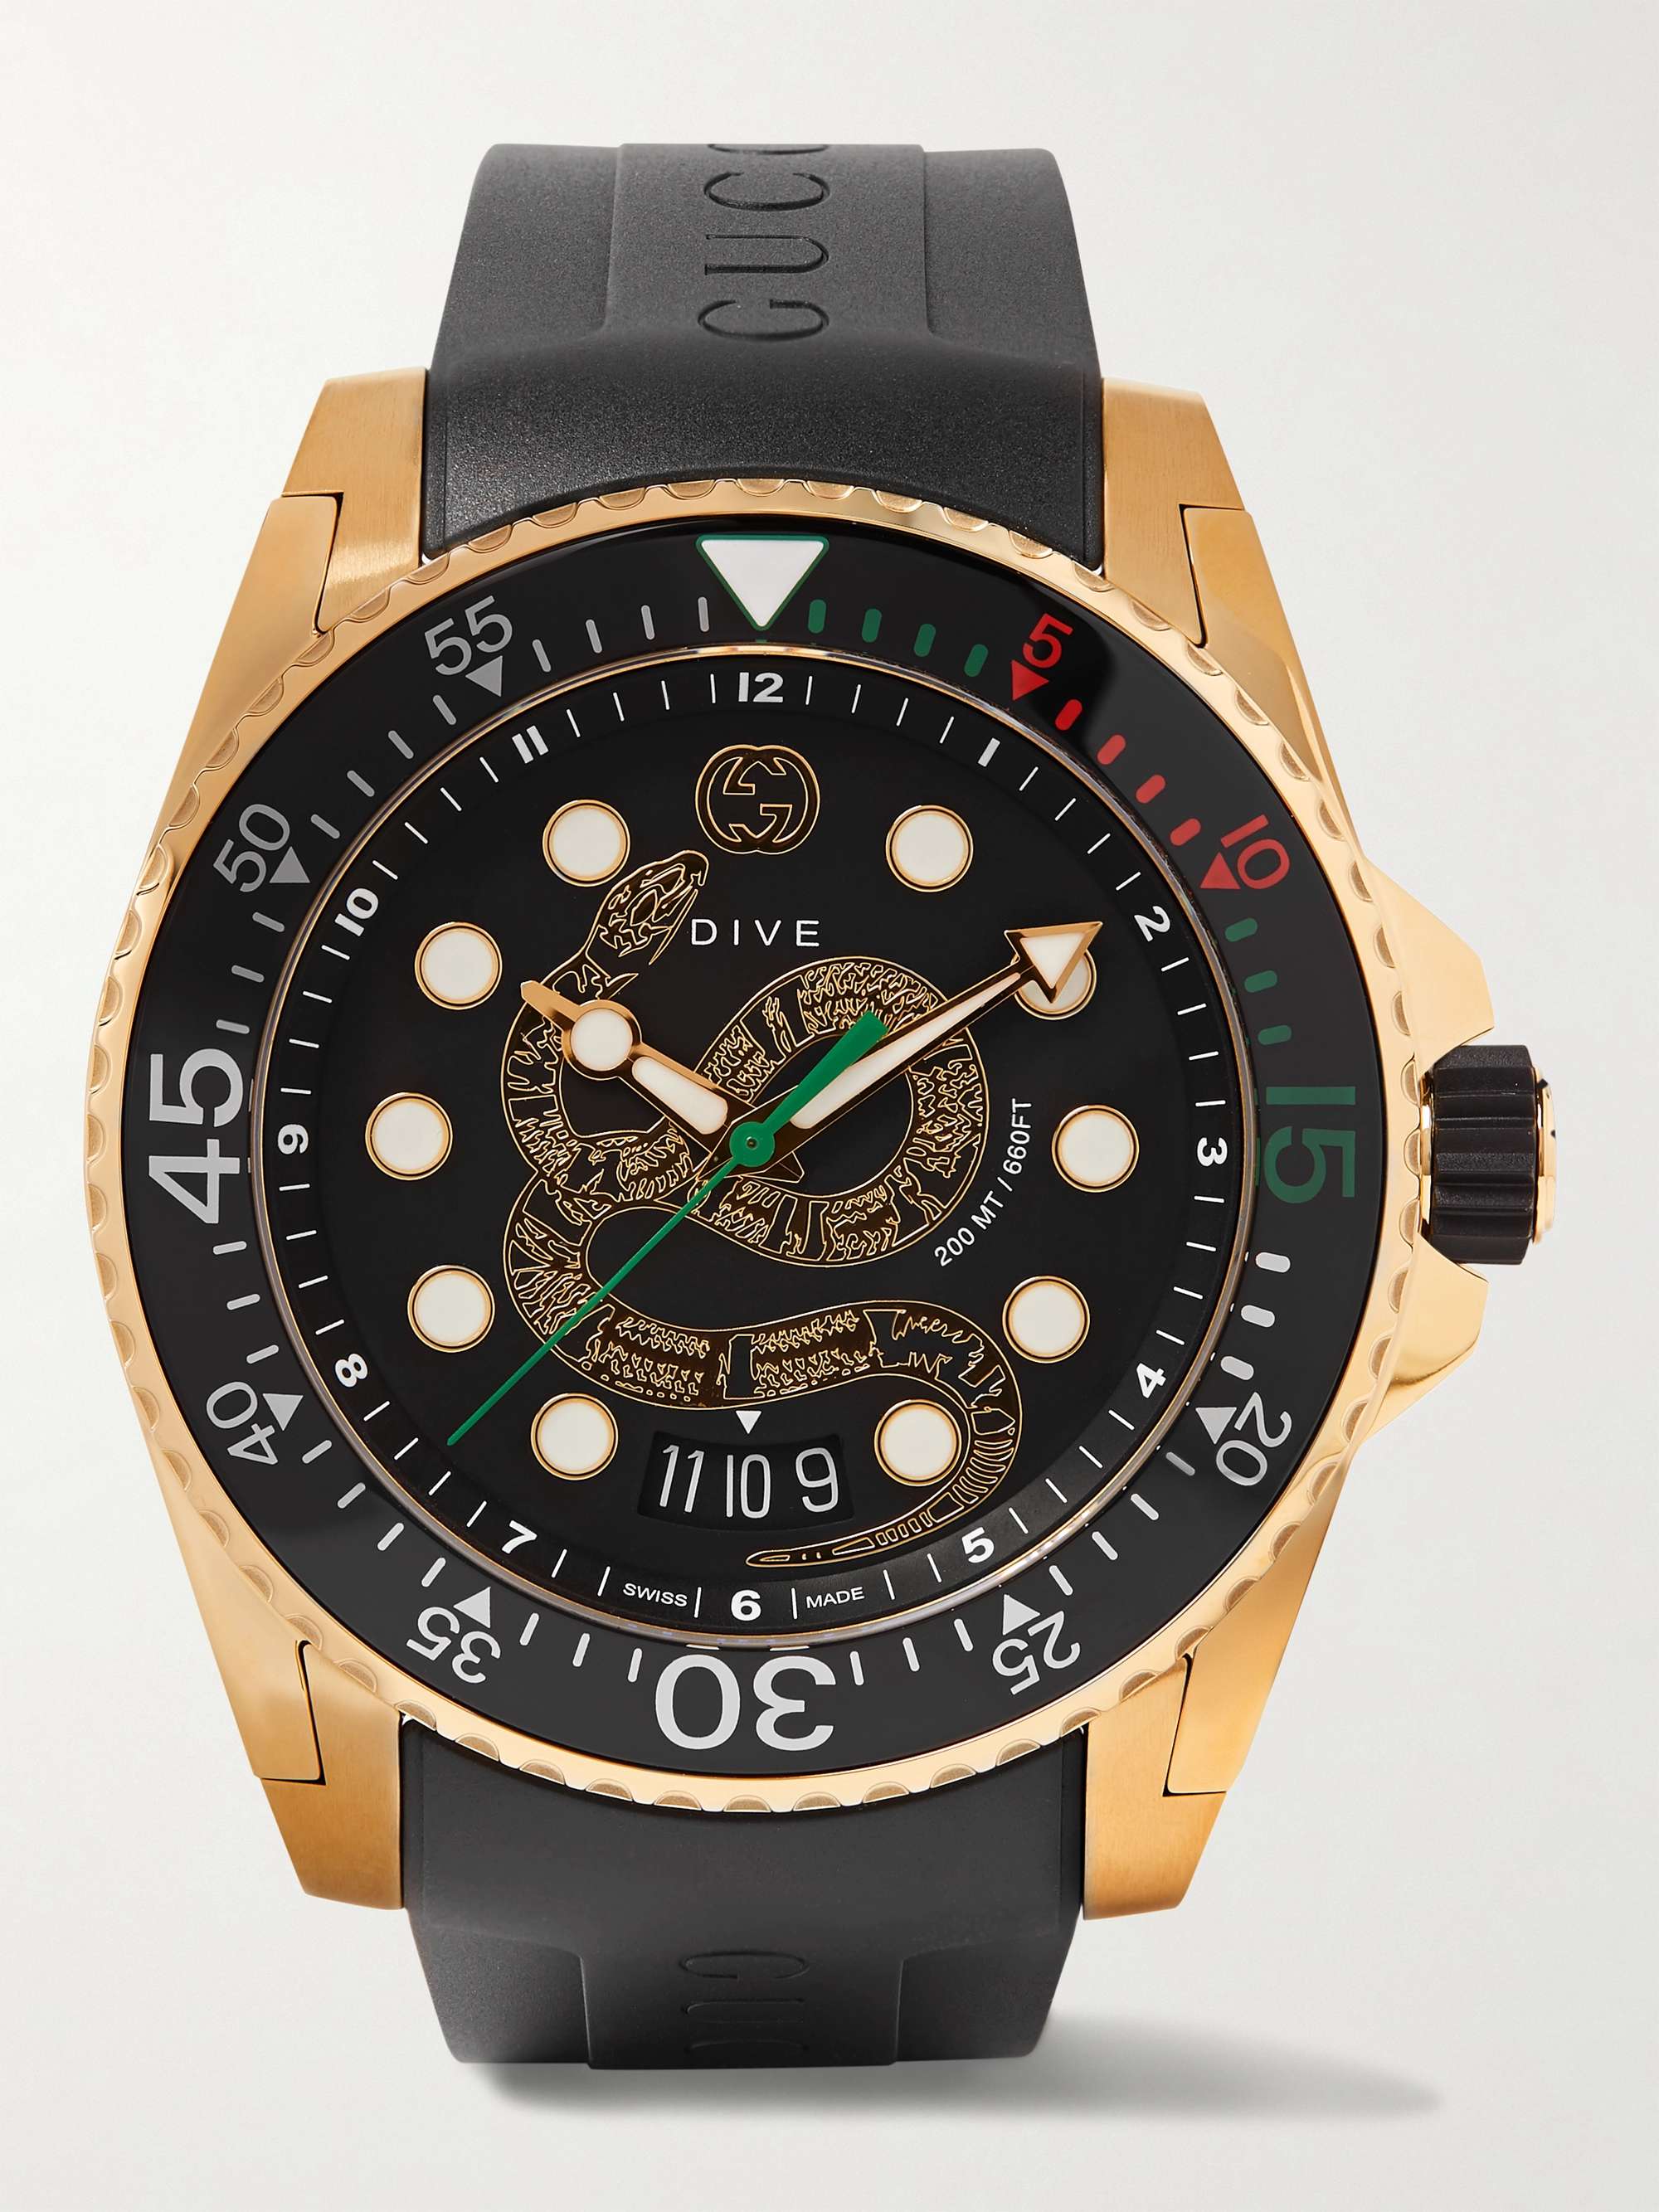 GUCCI Dive 45mm Gold PVD-Coated Watch with Rubber Strap | MR PORTER